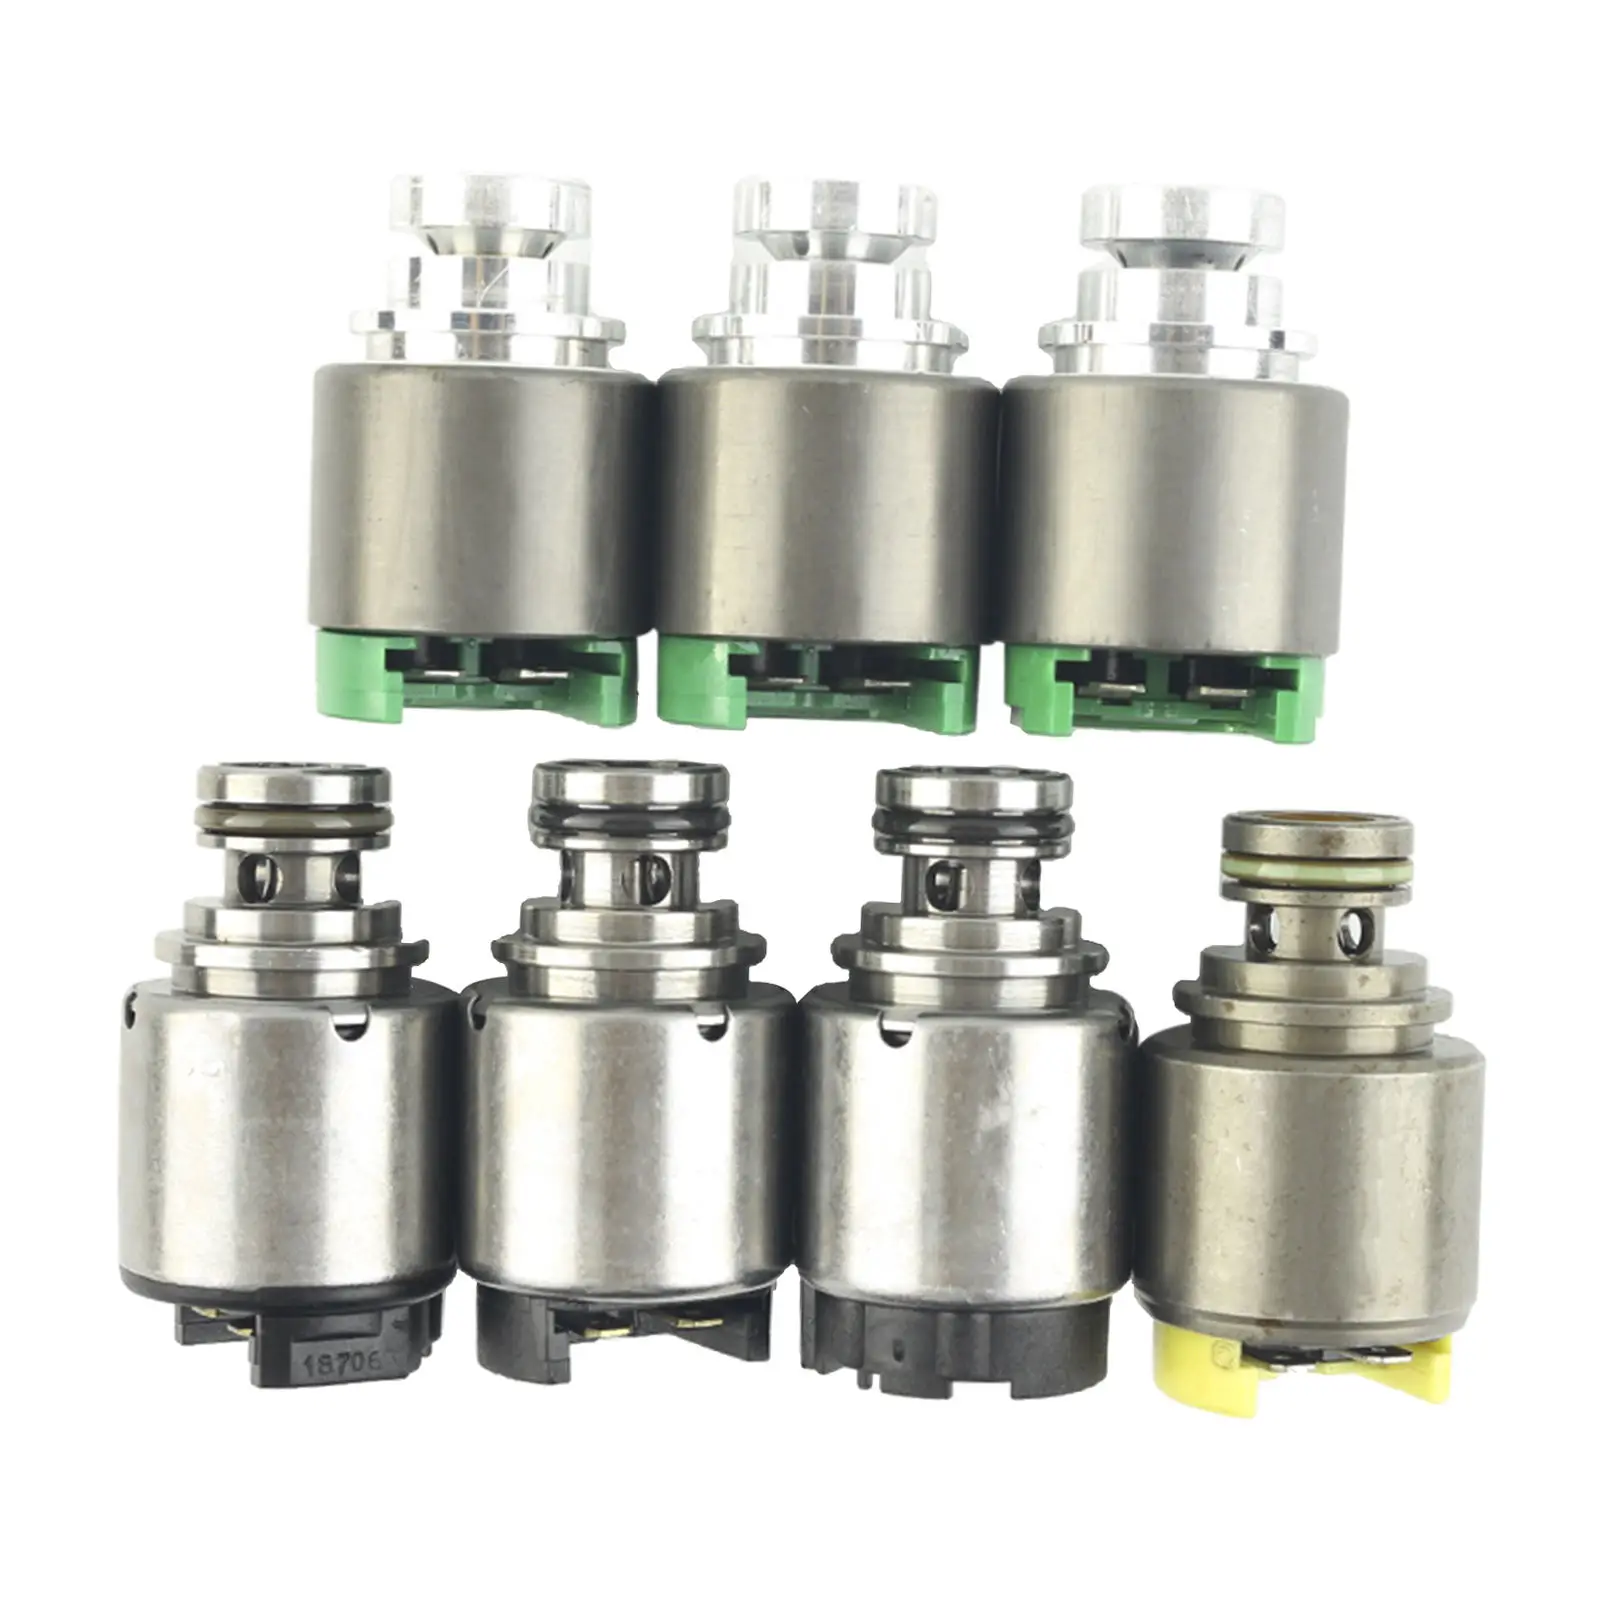 7pc Transmission Solenoids Kit Set 5 Speed Replacement For AUDI A6 A8 S4 S6 RS6 ZF1068298035, 5-SPEED Automatic Transmission